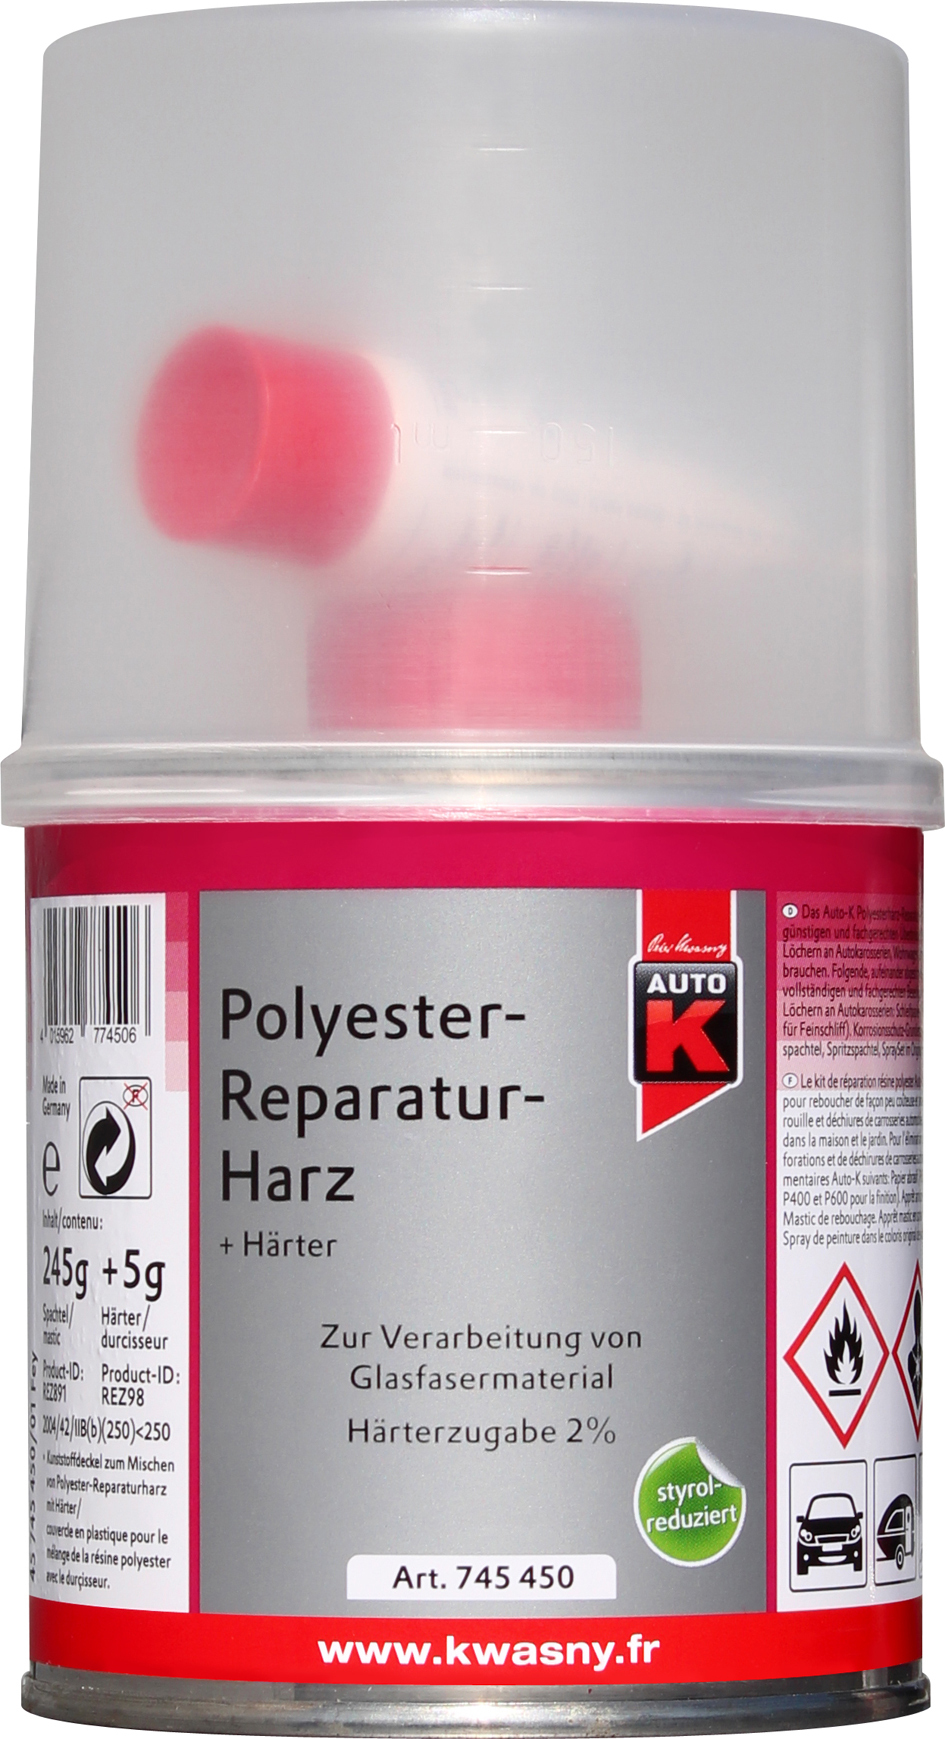 Peter Kwasny GmbH Auto-K POLYESTER-REPARATURHARZ 250G